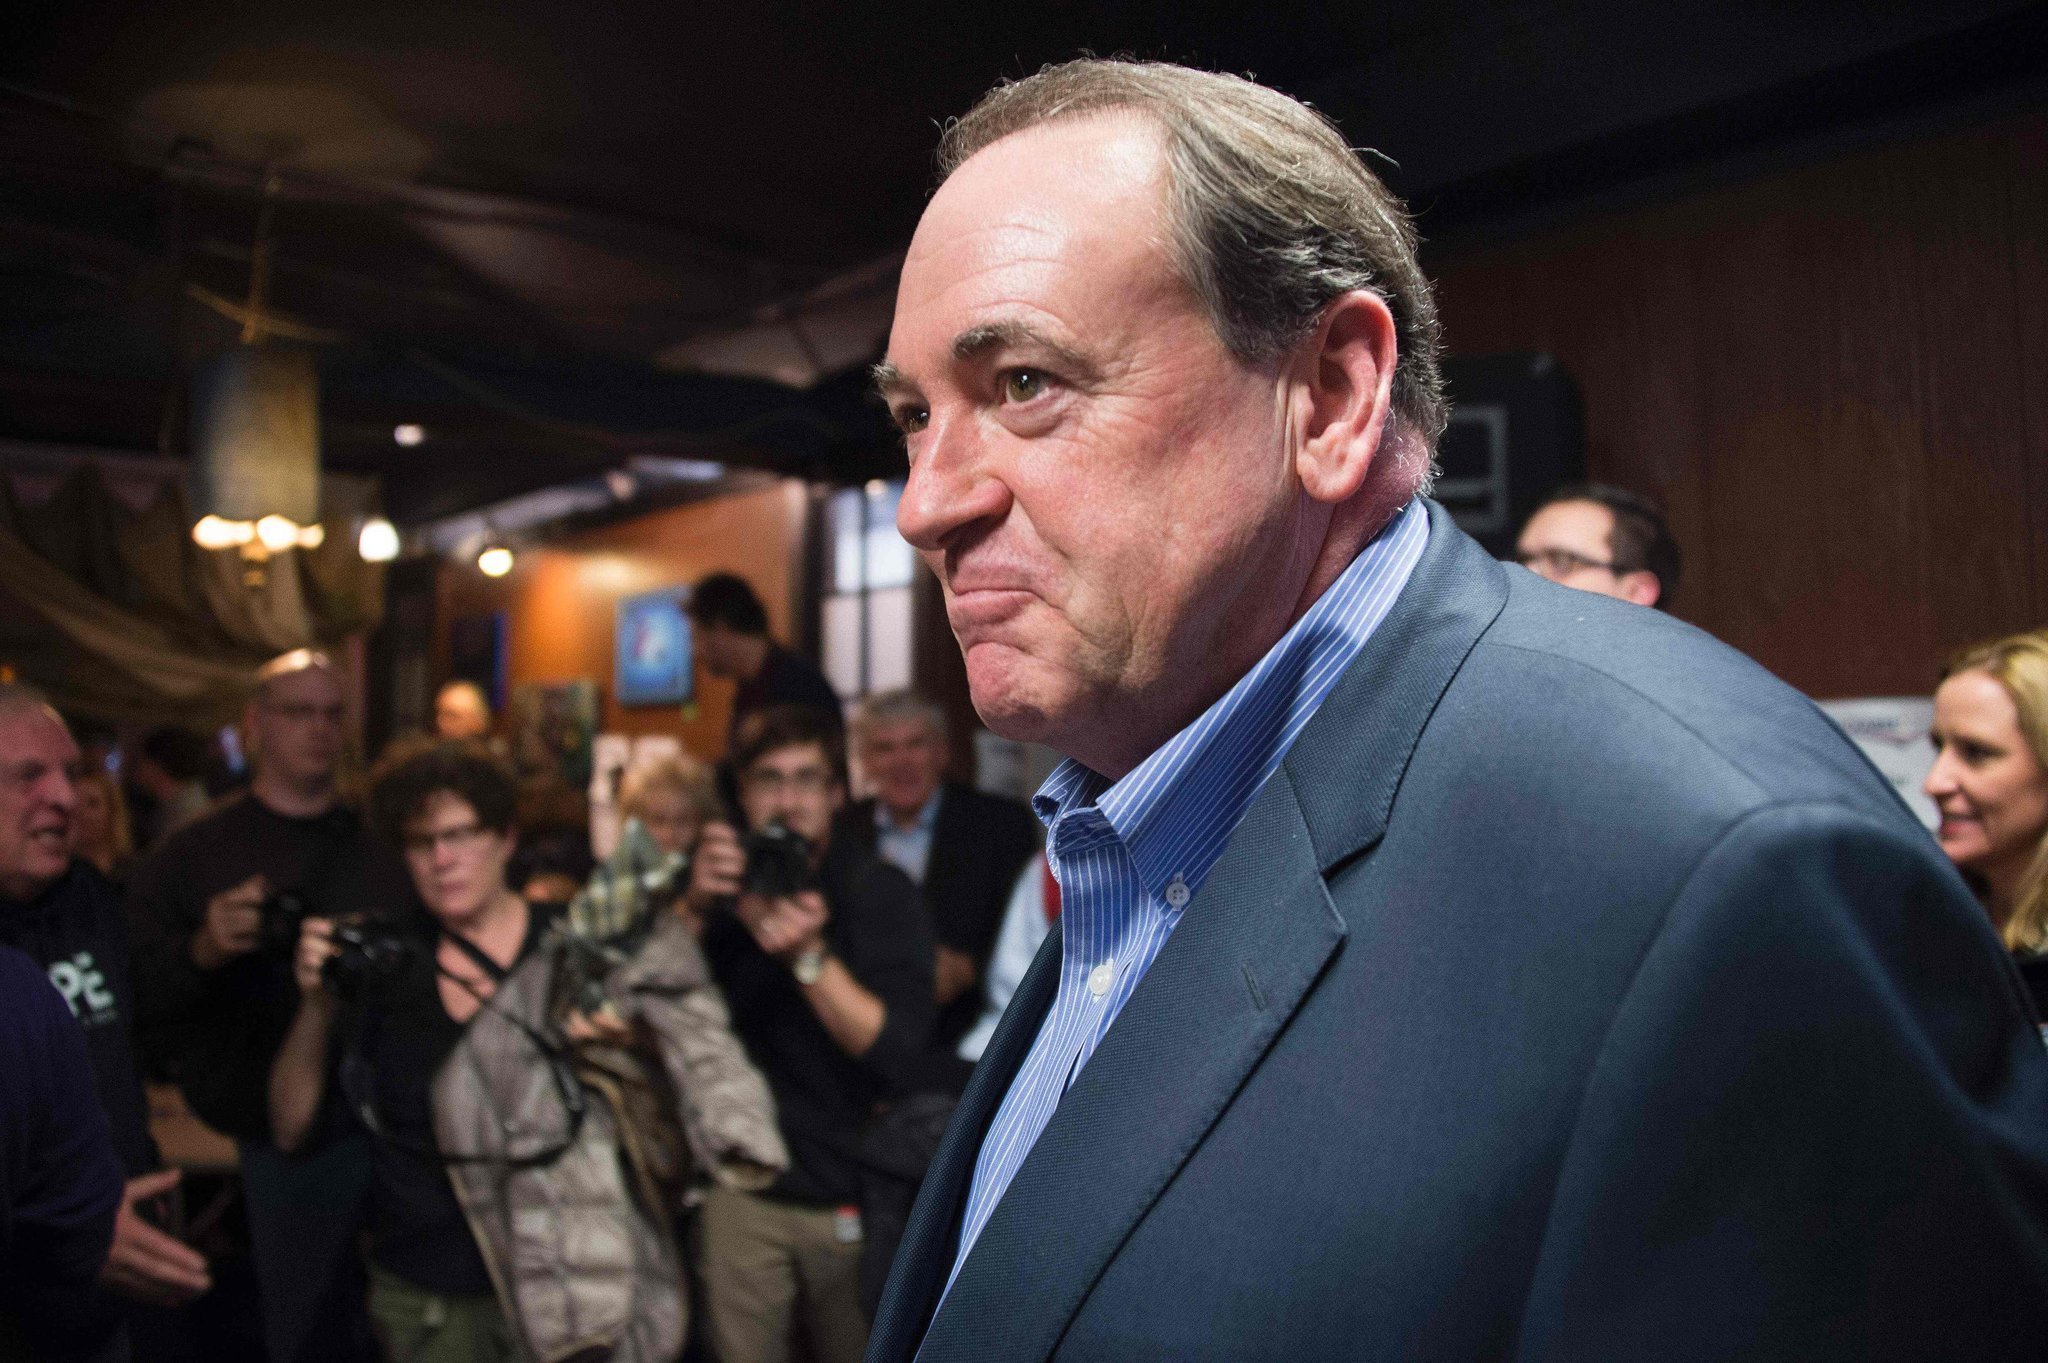 Mike Huckabee dropping out of GOP race - Orlando Sentinel2048 x 1363